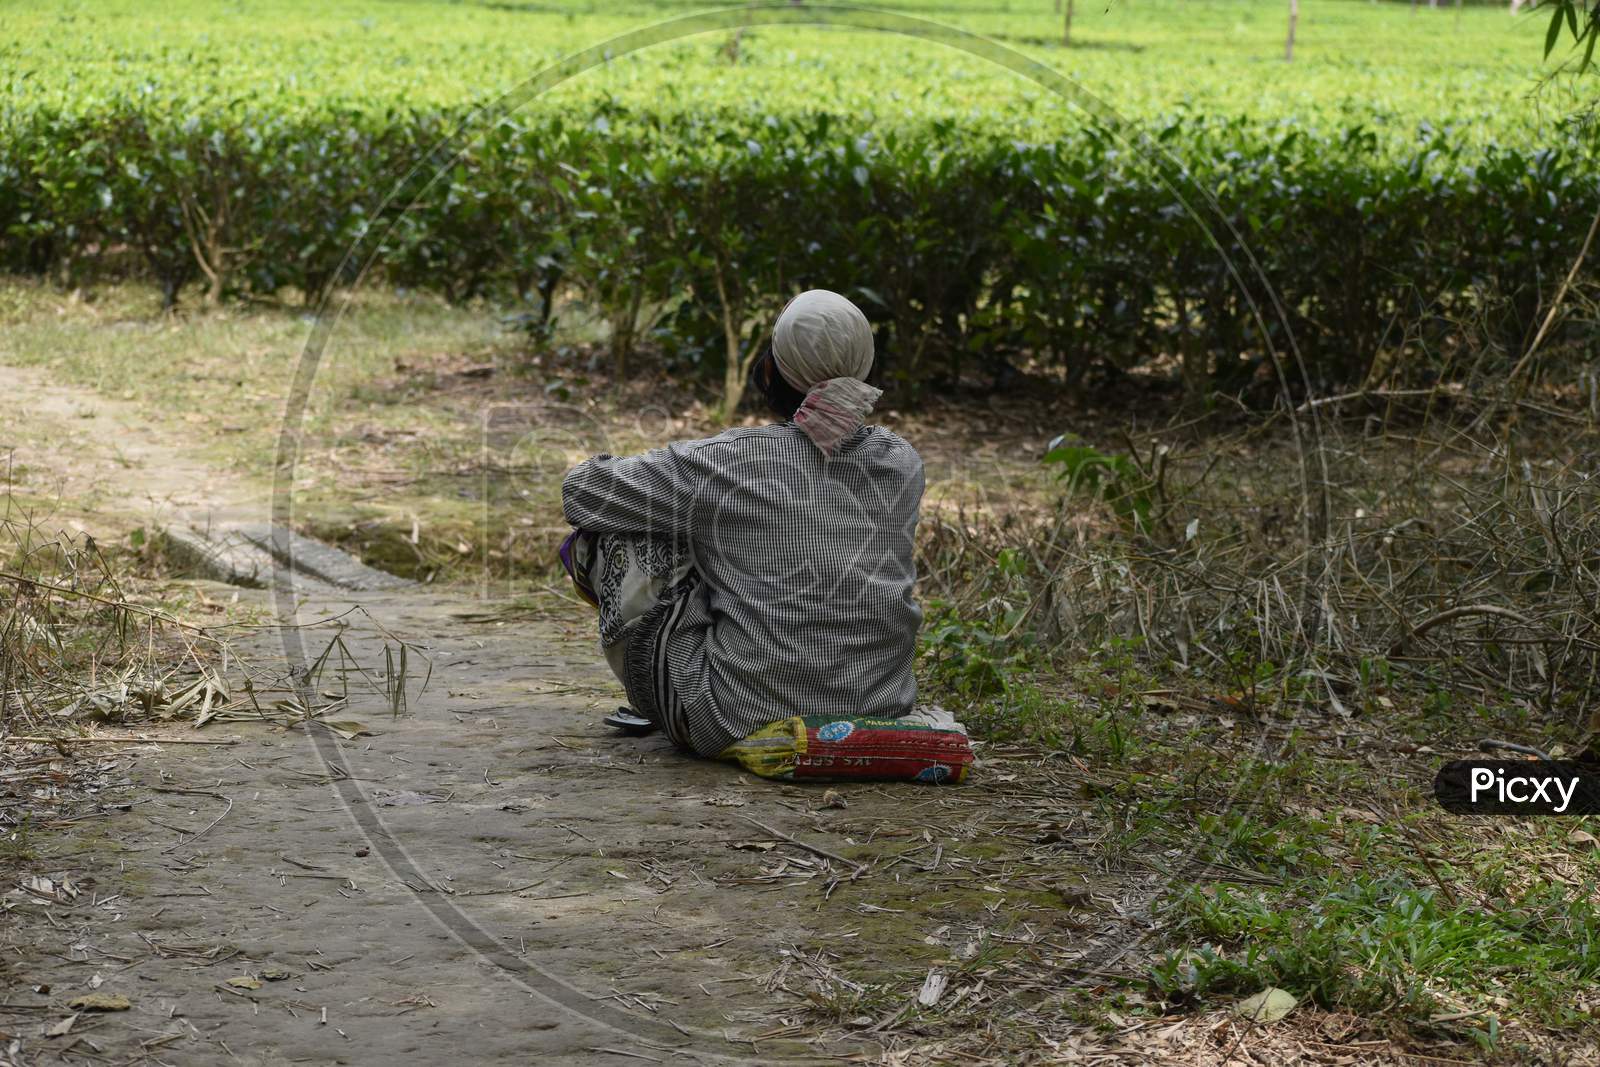 a tea garden lady labour is taking rest after long shift of work